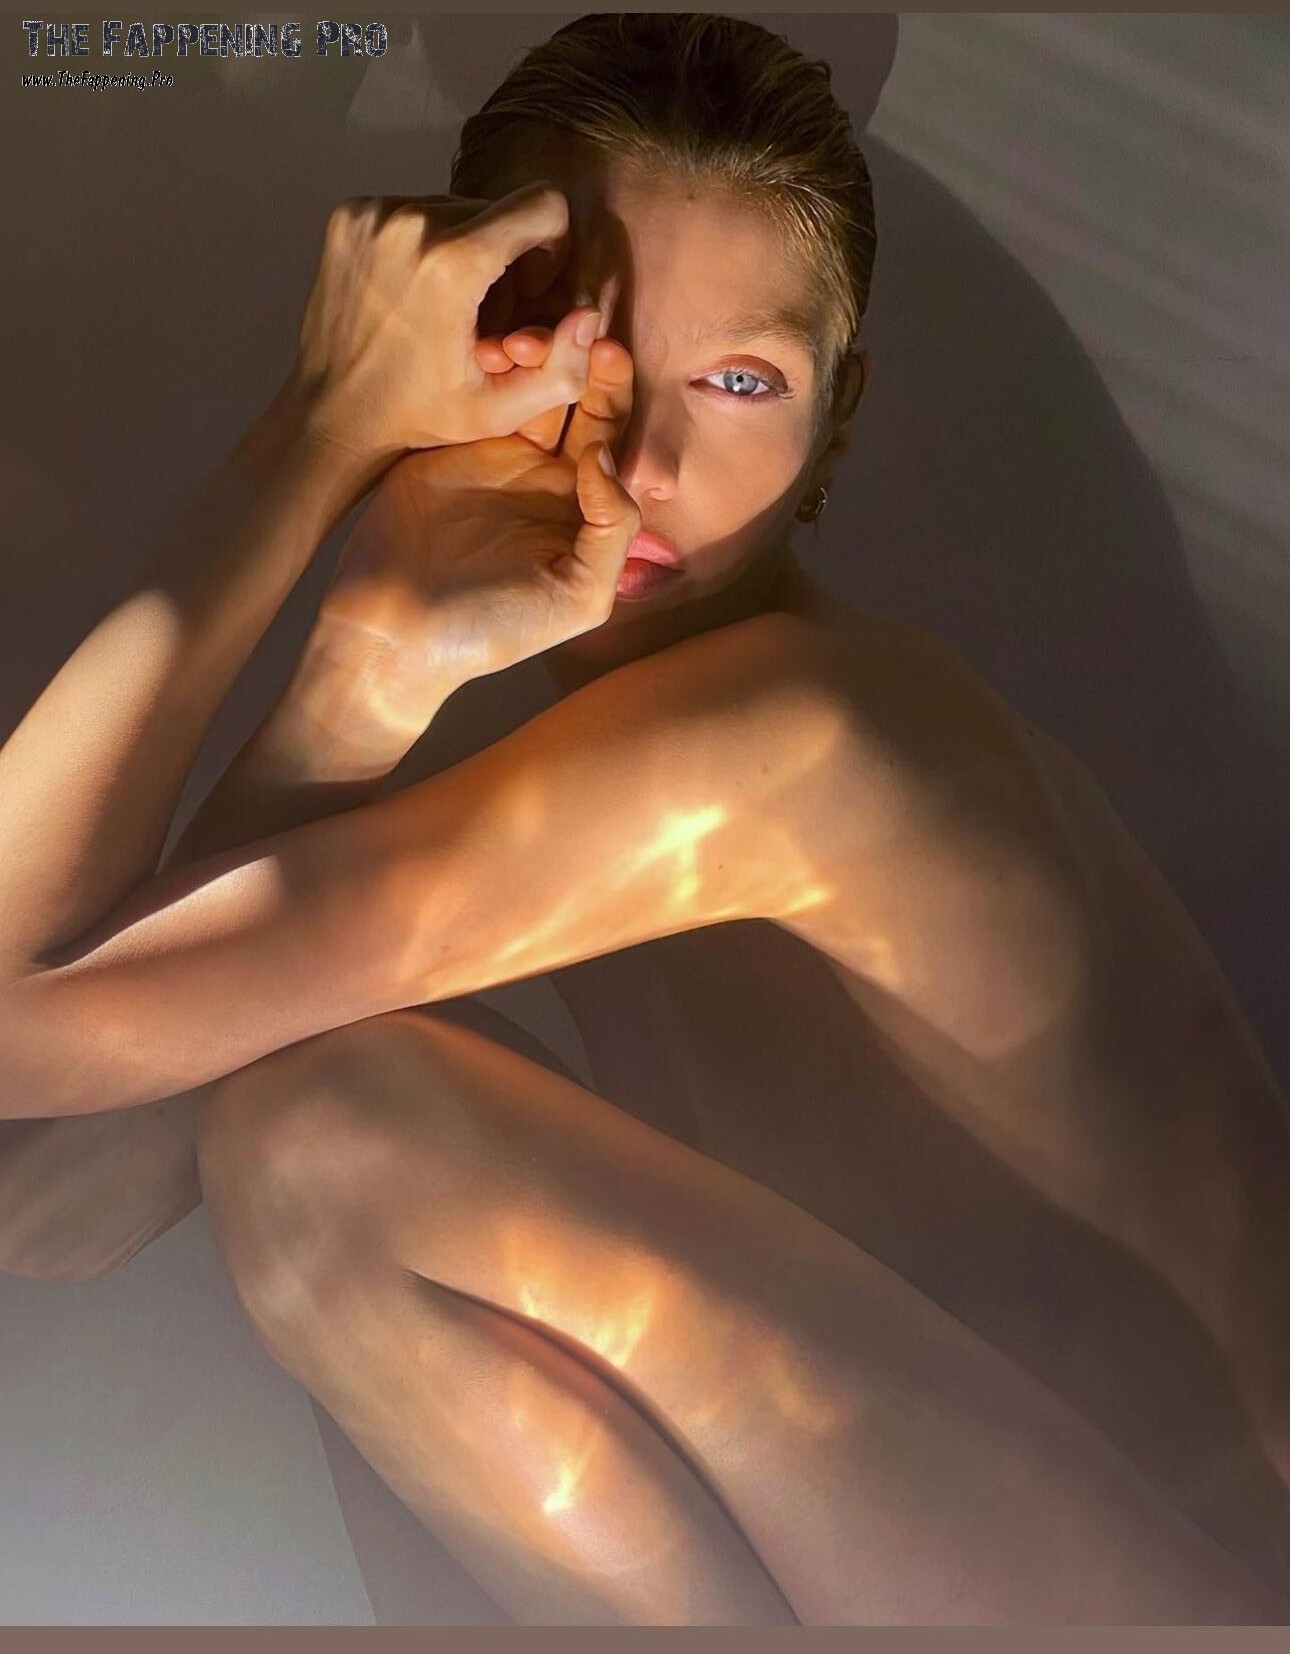 Get ready for a scandalous story as 33-year-old model Stella Maxwell shocks the world with a series of jaw-dropping nude photos on her Instagram page. With the caption "Au Naturelle", this Victoria's Secret beauty flaunts her natural beauty and glowing skin, attributing it to her use of only natural cosmetics and her love for Aloe Vera. Despite her age, Stella looks effortlessly stunning in these photos, proving that age is just a number in the world of high fashion. Don't miss out on the buzz surrounding this model's bold and fearless photoshoot!